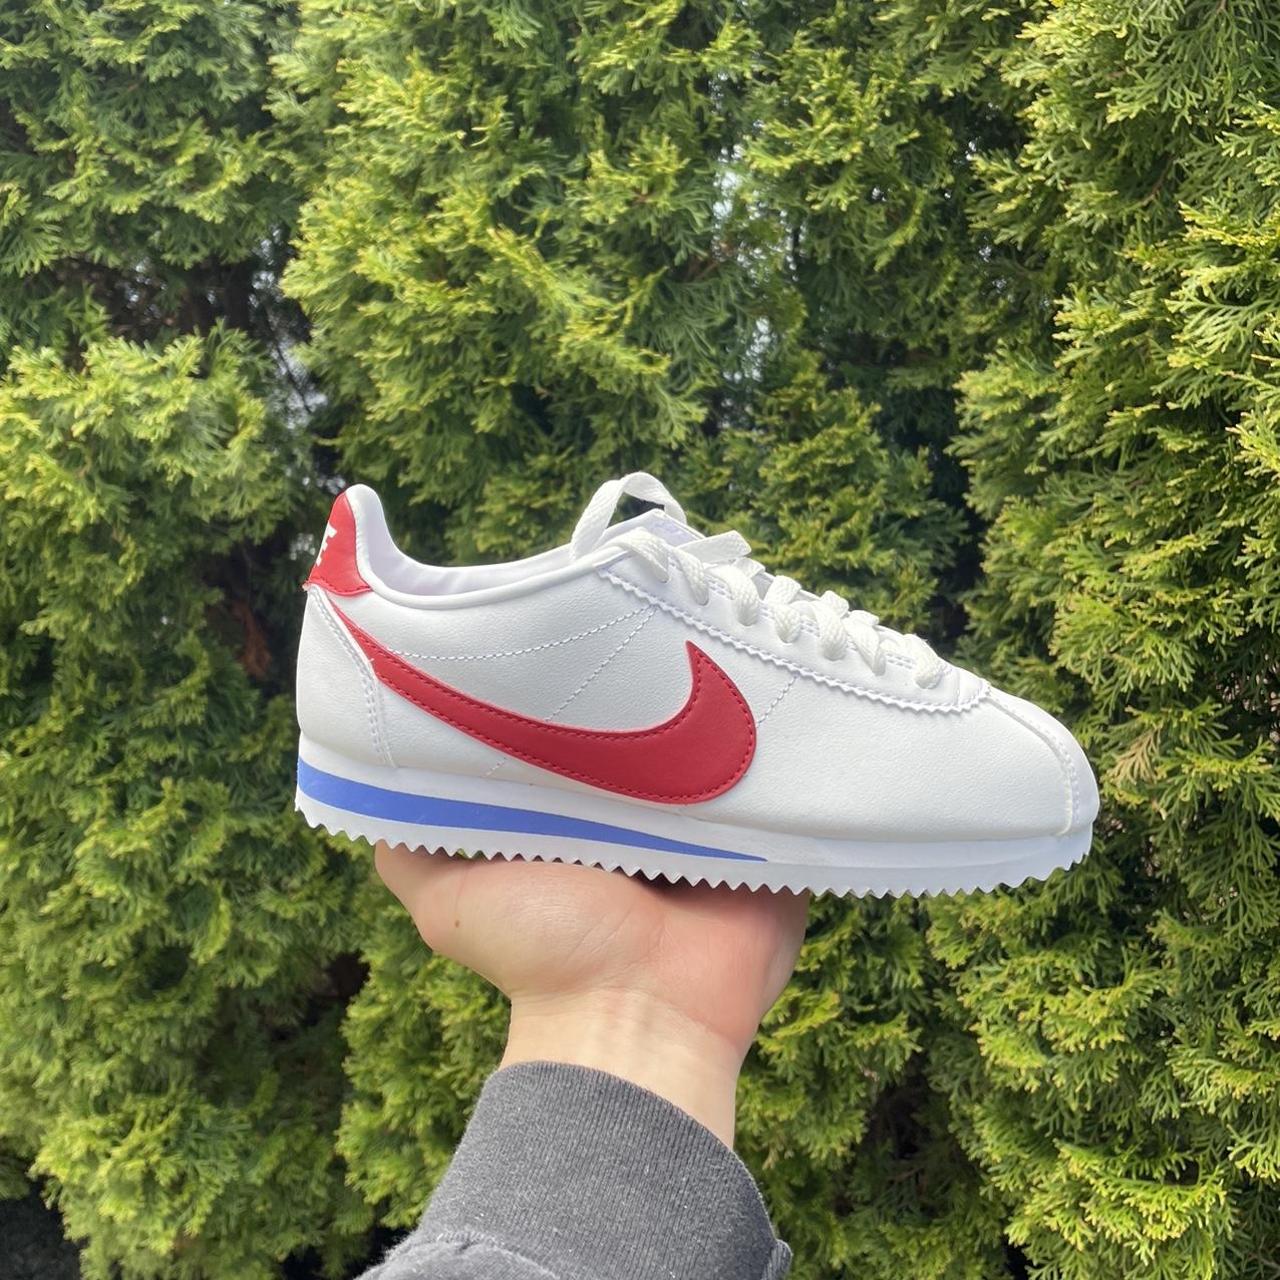 Nike Women's White and Red Trainers | Depop